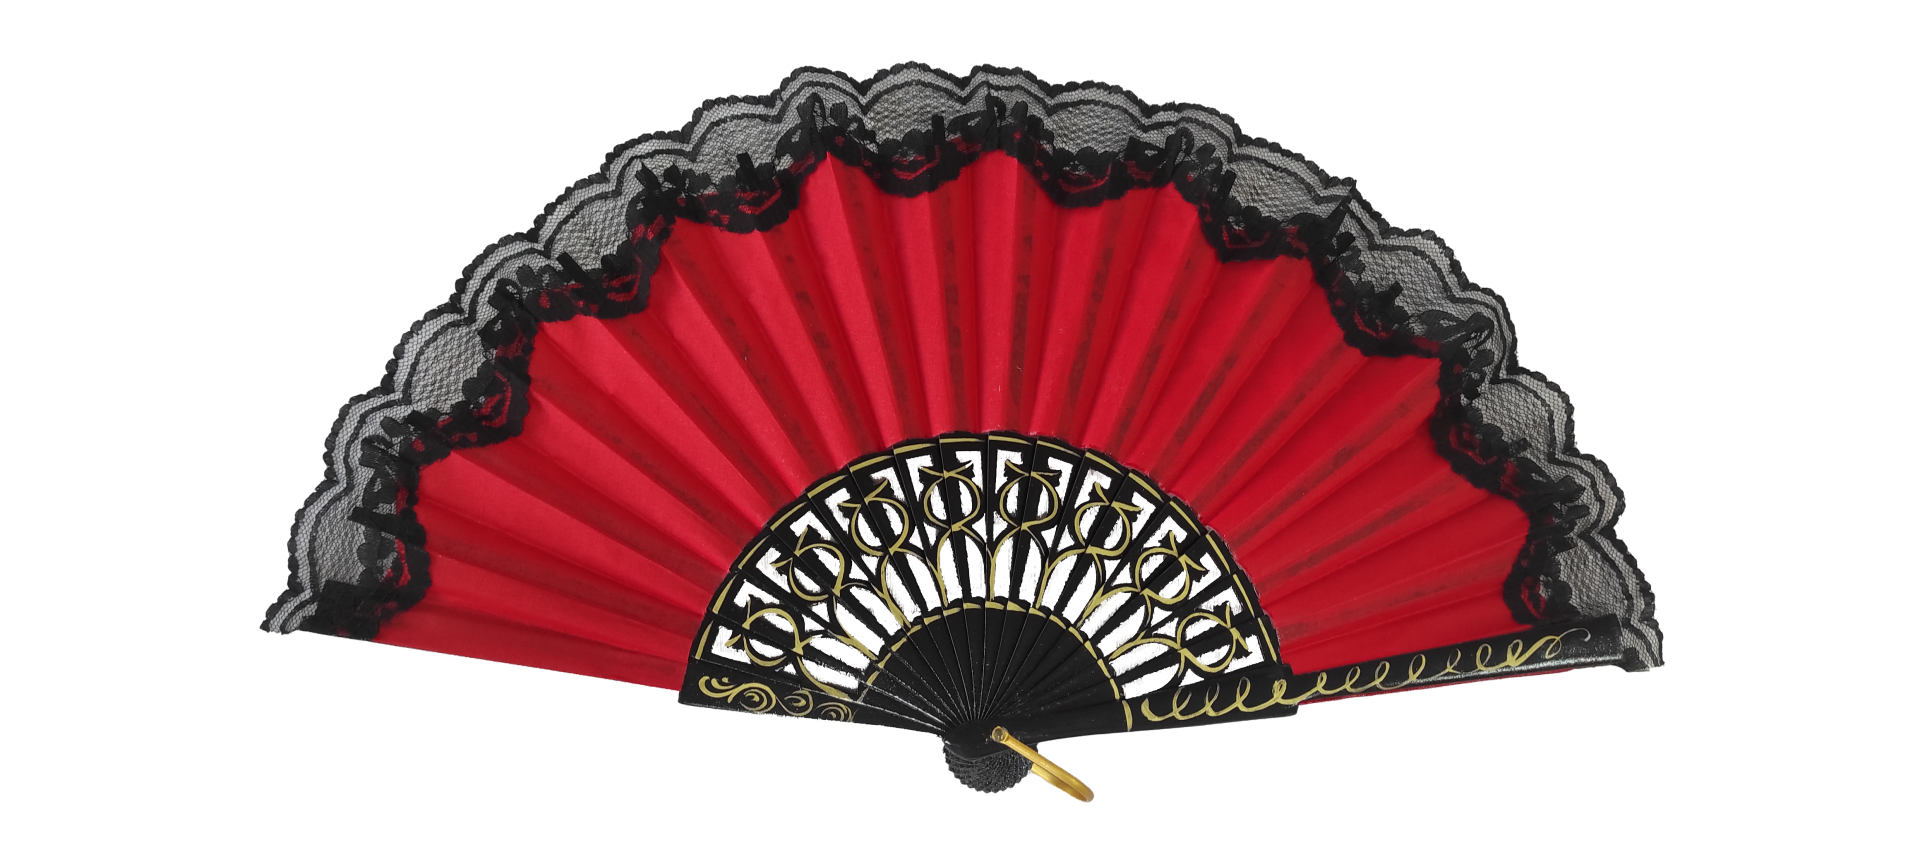 6313/1/11 NG - RJ - Wooden fan with lace - (black and red)